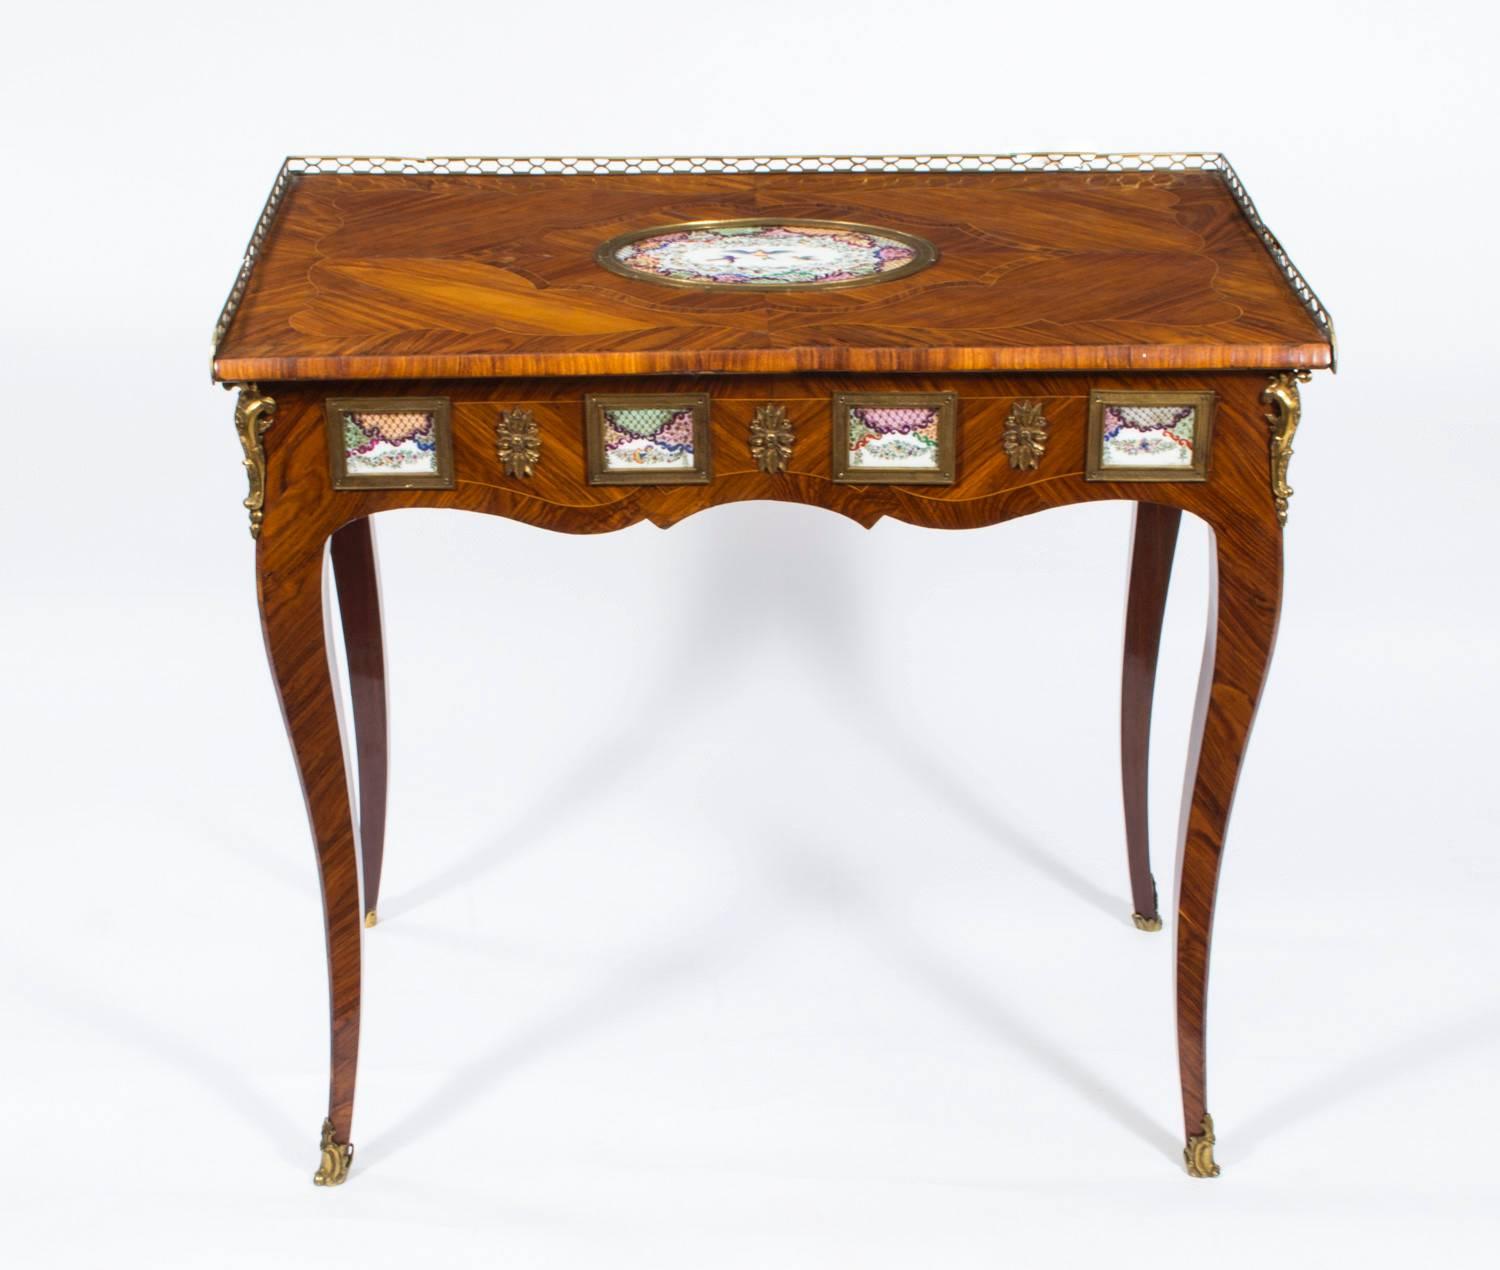 This amazing piece is an antique French writing table or side table with porcelain plaques and which dates from around 1780.

This late 18th century antique French walnut writing table (or side table) has been beautifully decorated with lovely